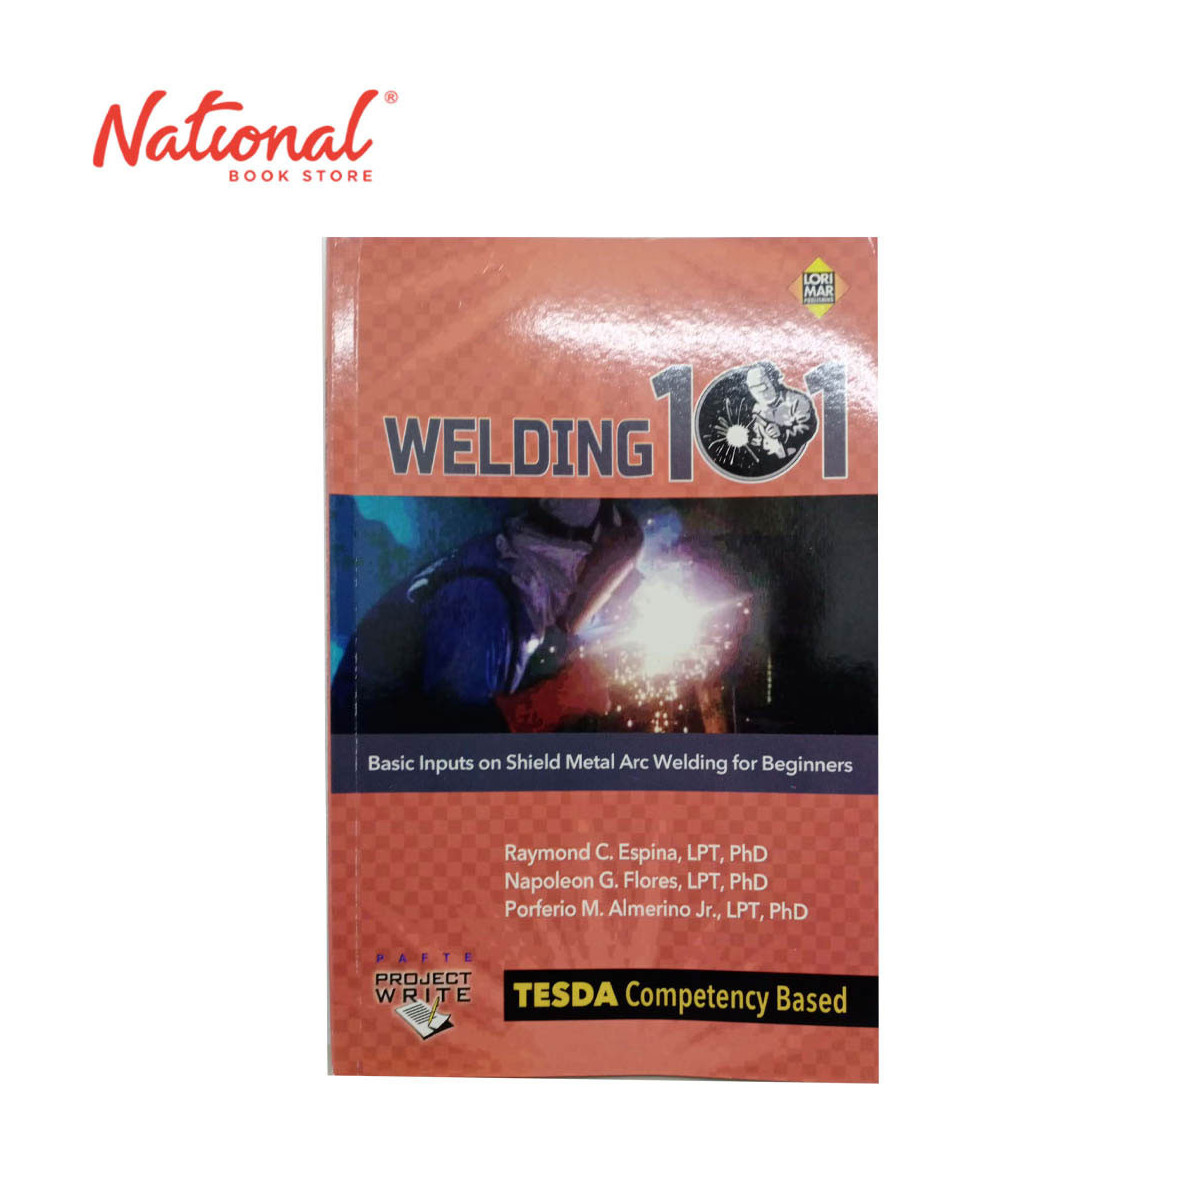 Welding 101 (TESDA Competency Based) by Raymond C. Espina, et. Al - Trade Paperback - College Books